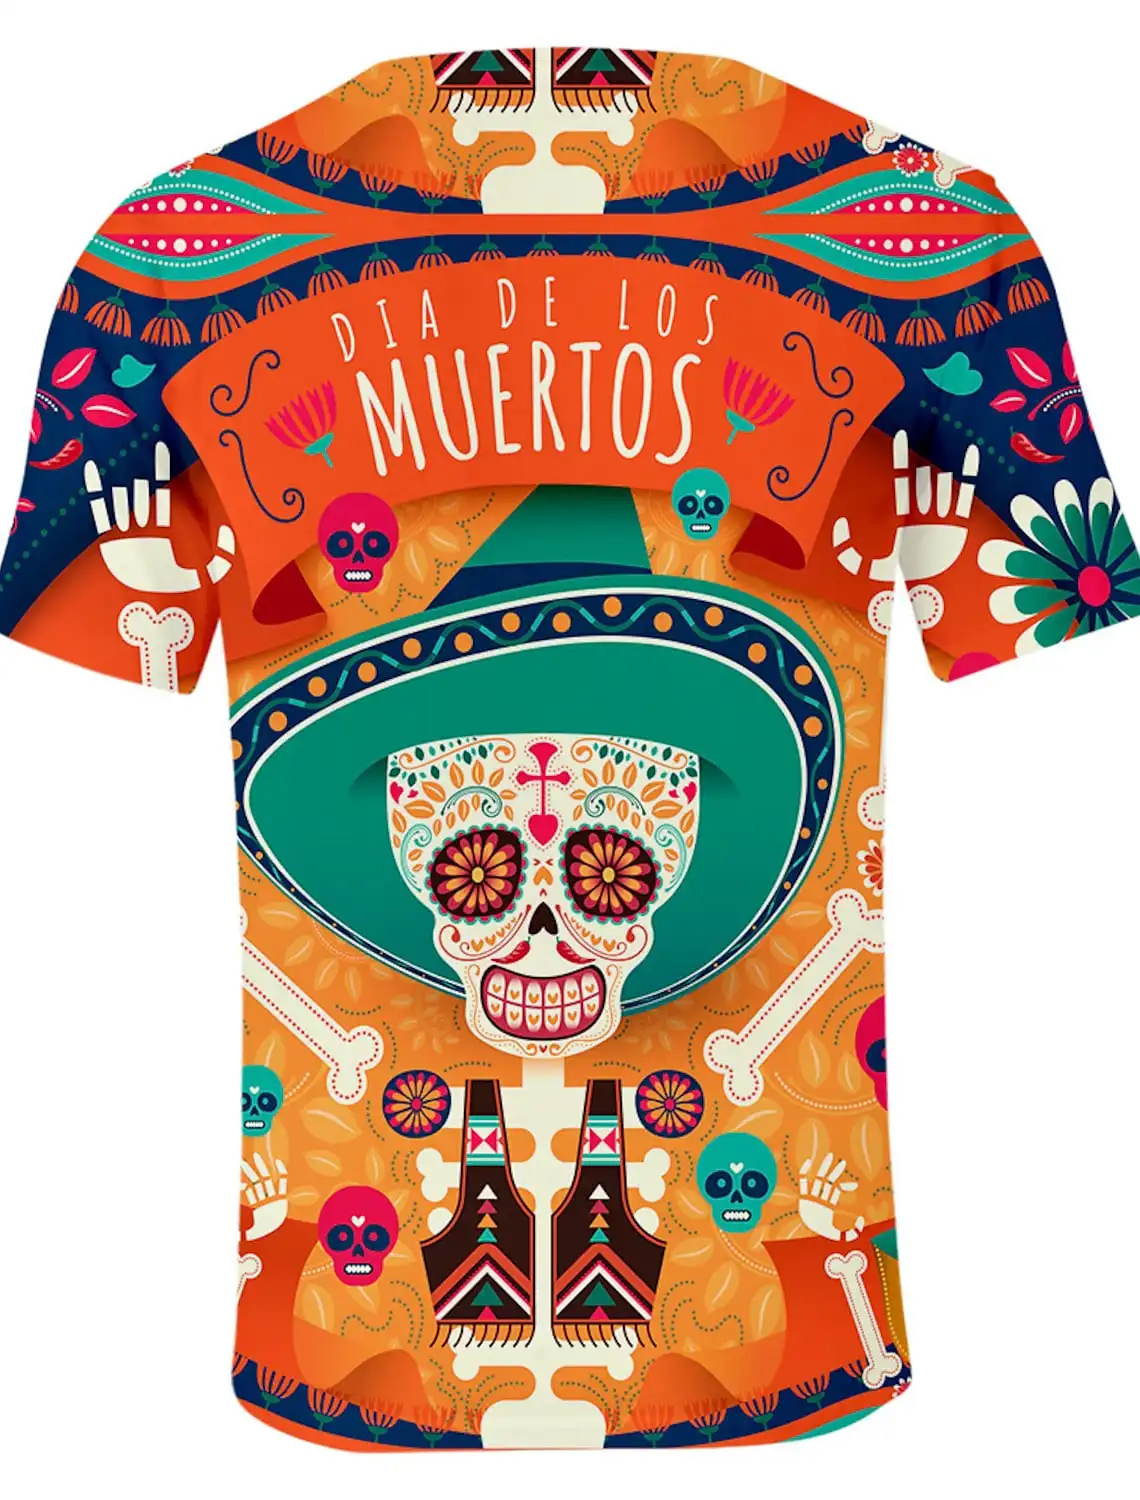 

Funny Sugar Skull Mexican T-shirt Anime Cartoon Anime Mexico Independence Day Day of the Dead T-shirt For Men Women's Top tees